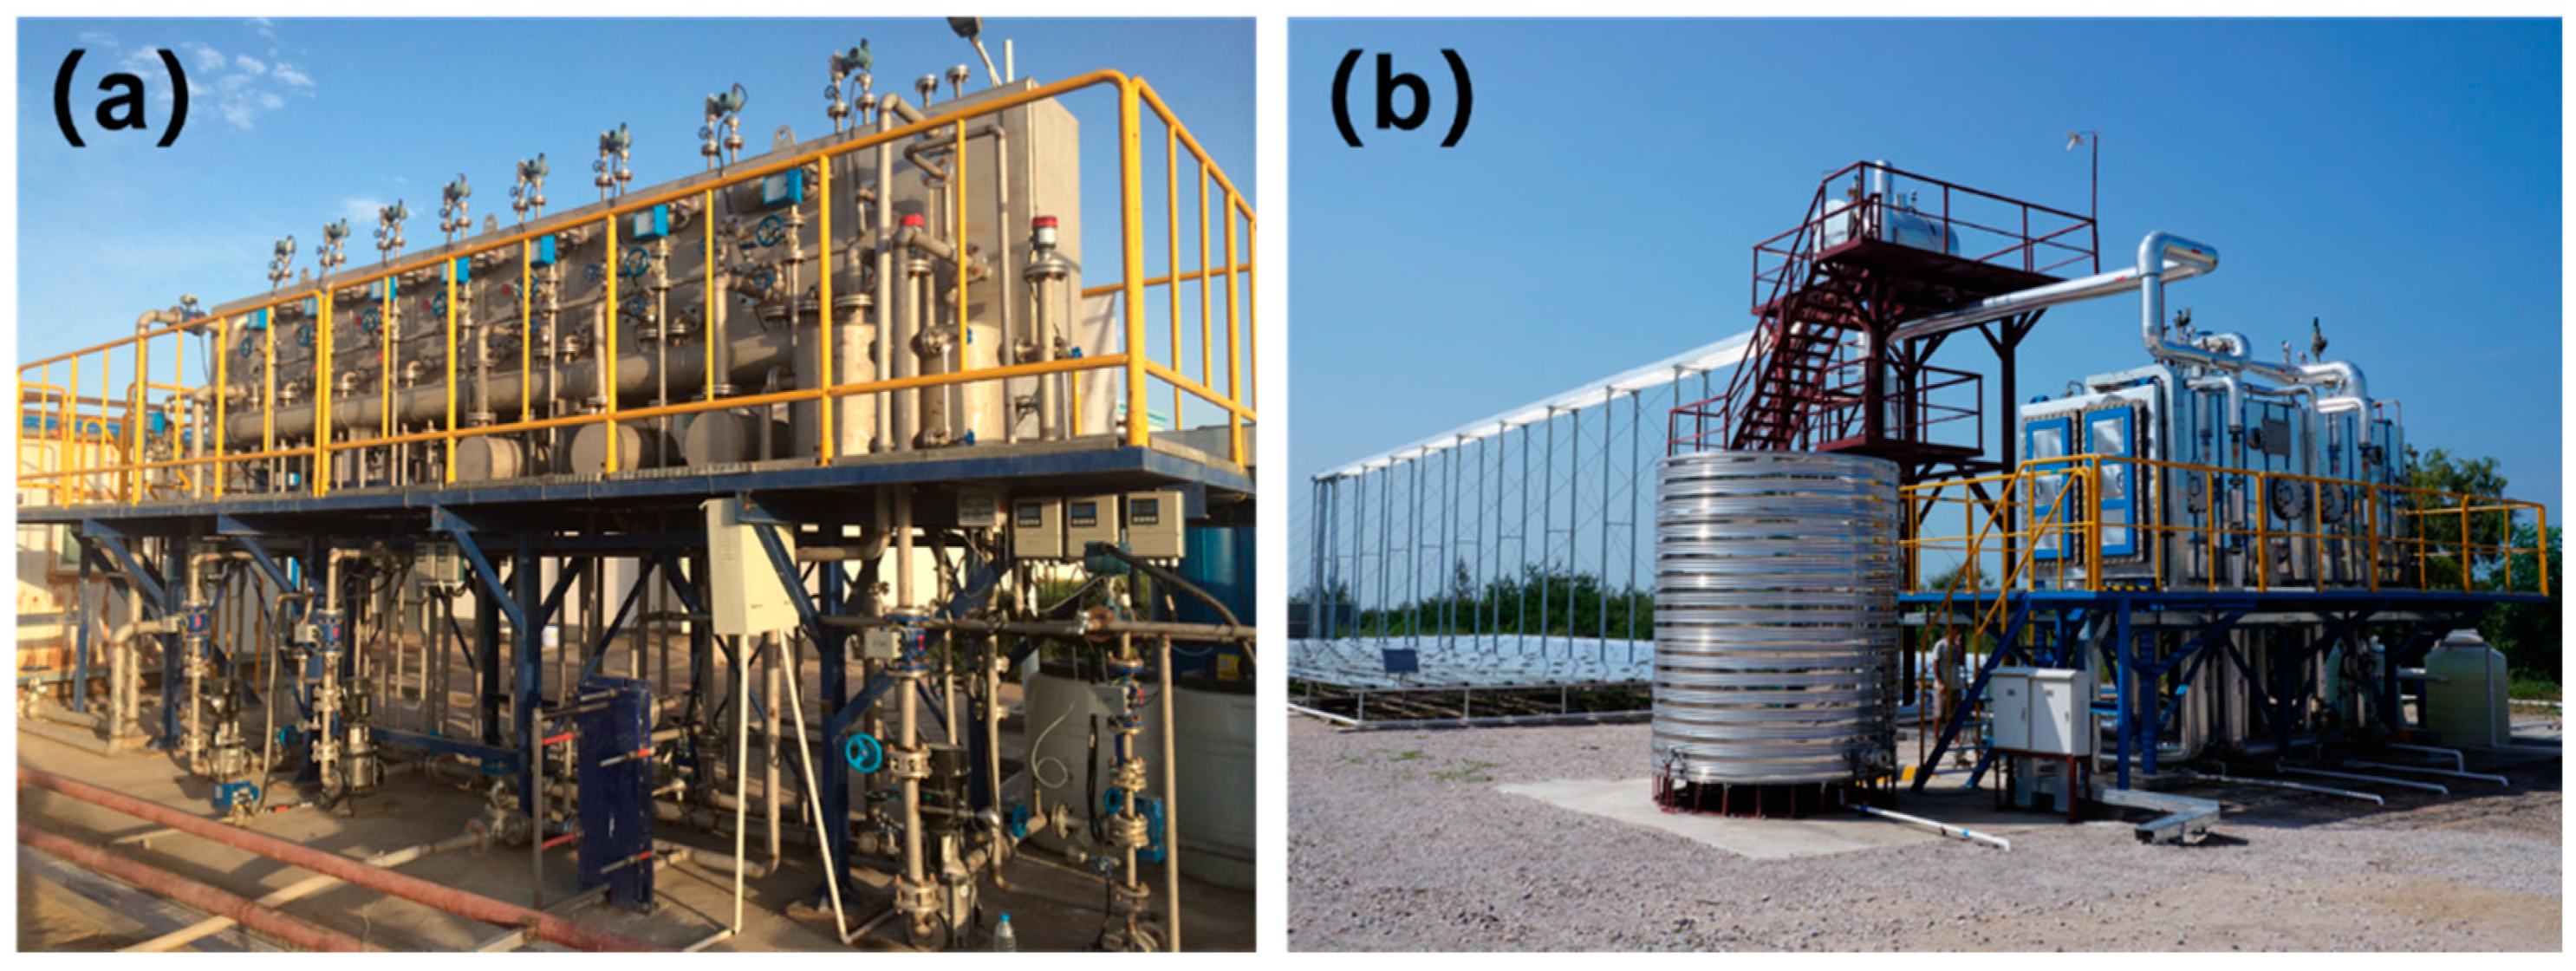 Membranes | Free Full-Text | Progress and Perspectives of Desalination in  China